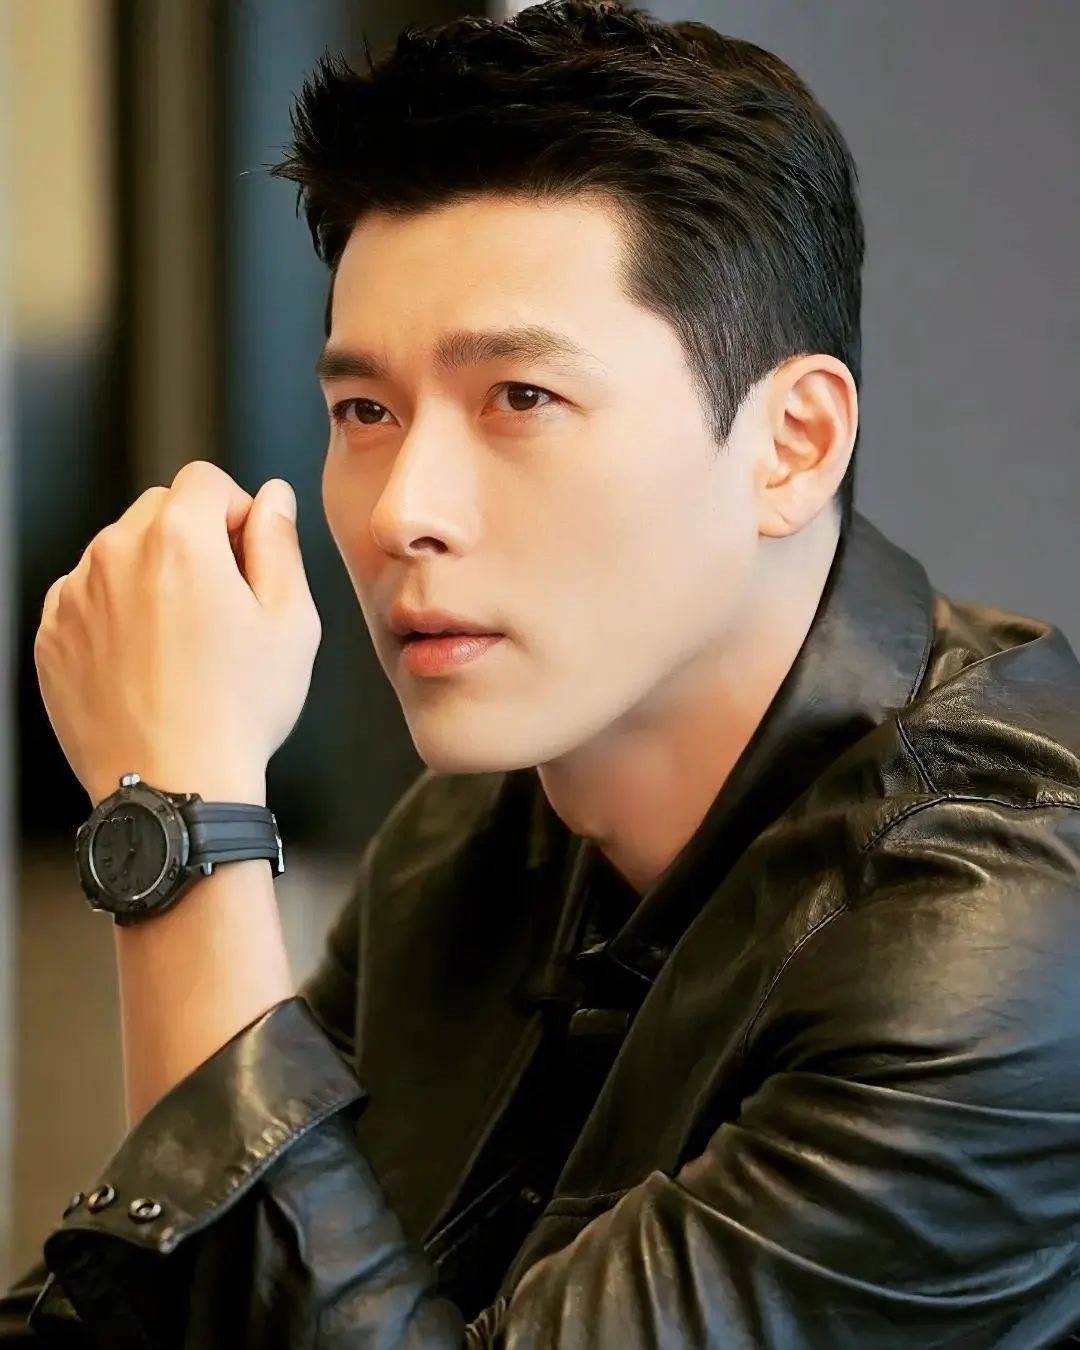 From Lee Byung-hun to Gong Yoo to Hyun Bin (pictured), we rank the 10 greatest male K-drama actors of all time. Photo: Instagram/@hyunbinactor_